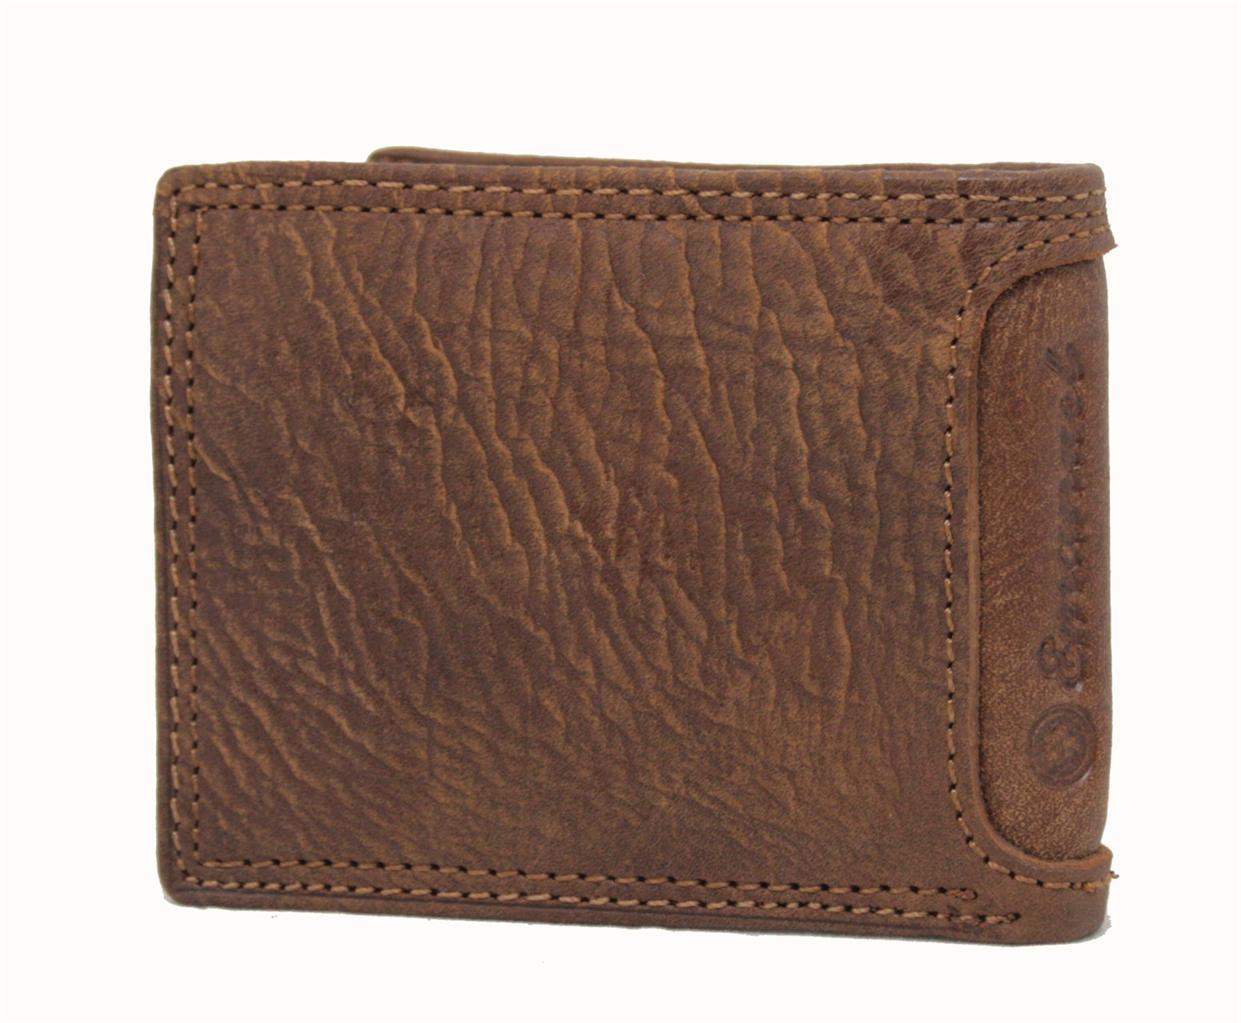 Wallet For Men Trifold Handmade Grize Leather! Wallet 41230! 360 RotarryView! 3D | eBay